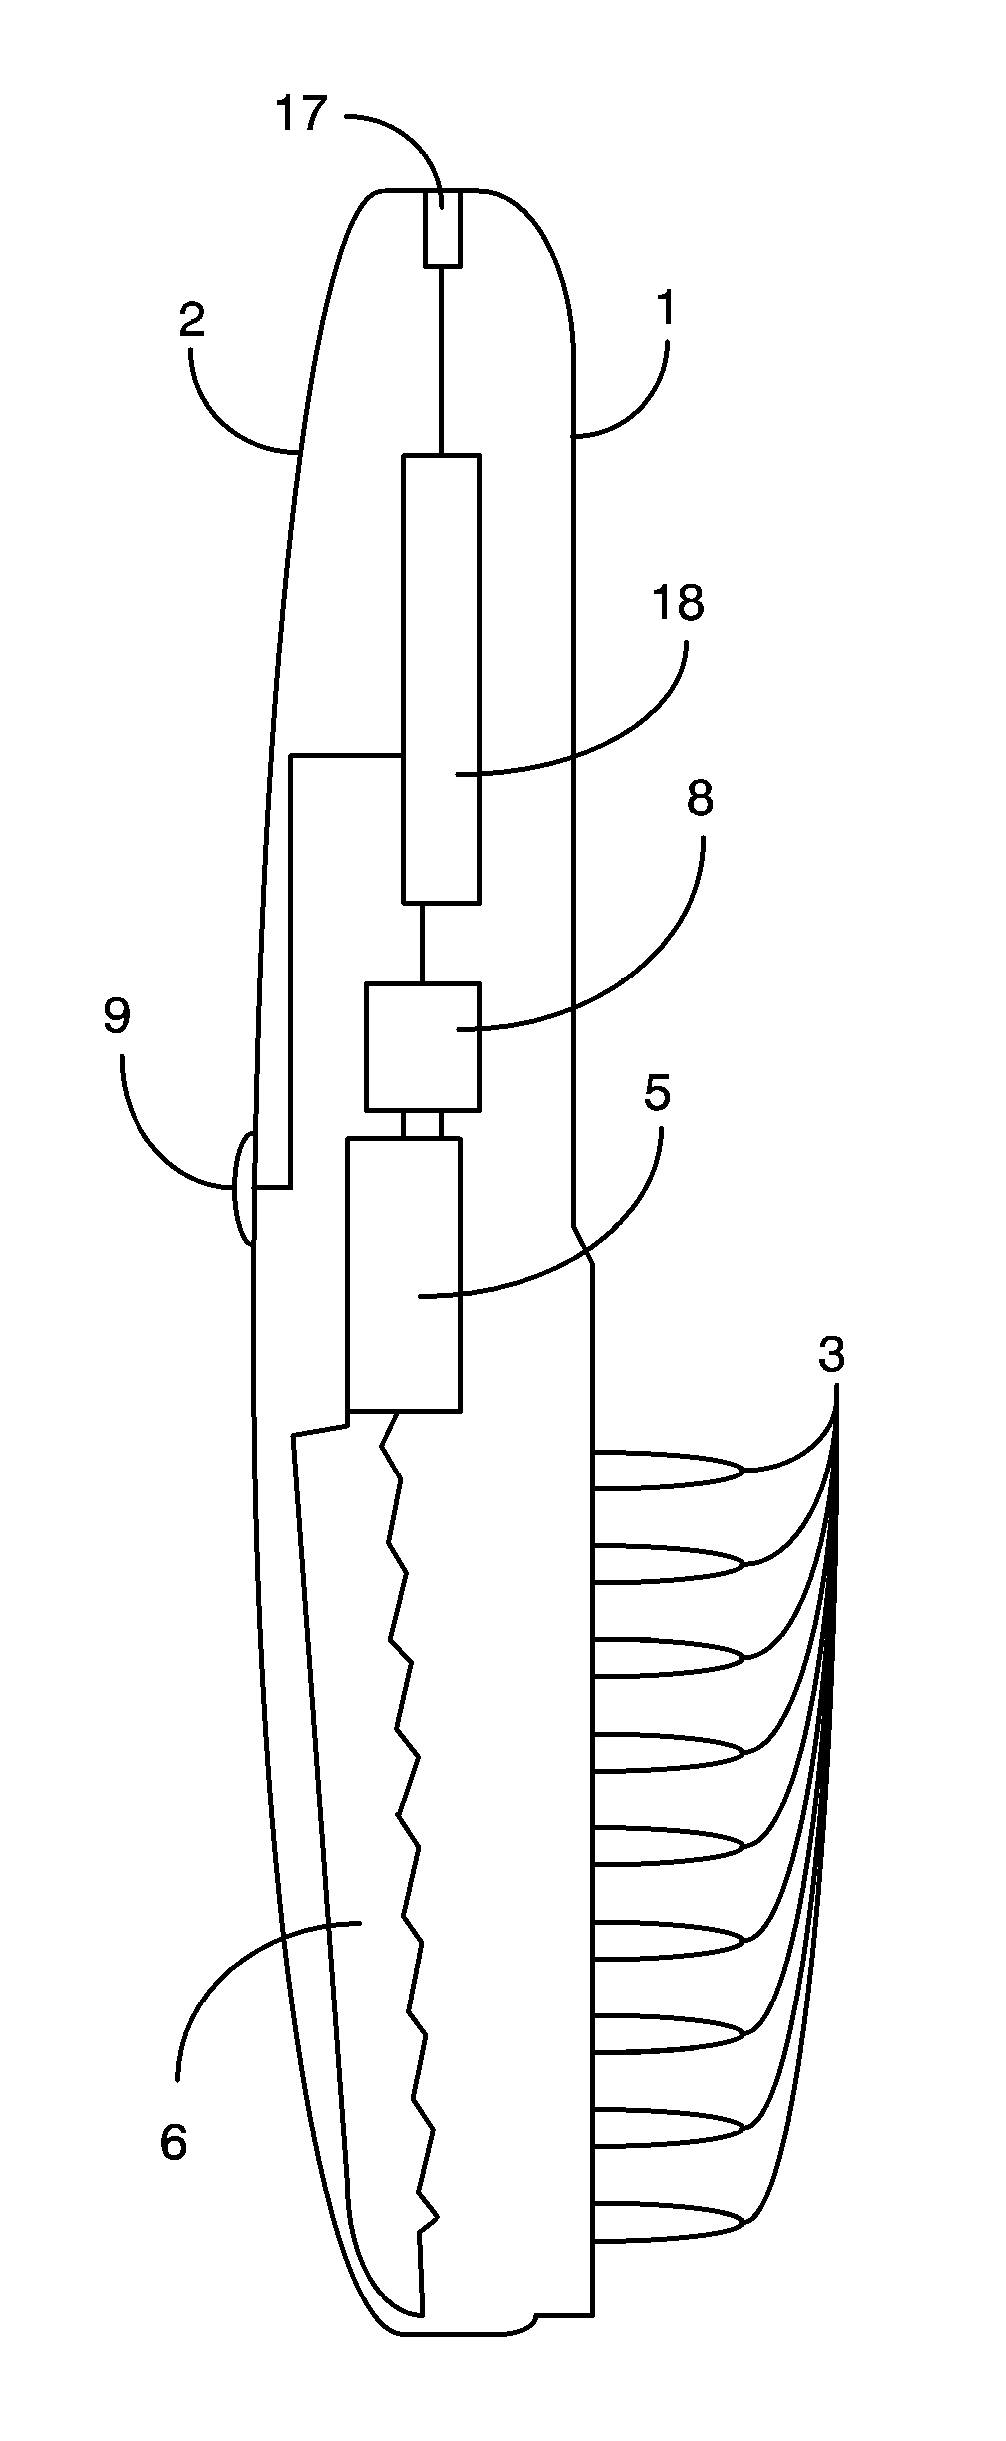 Apparatus and Method for Stimulating Hair Growth